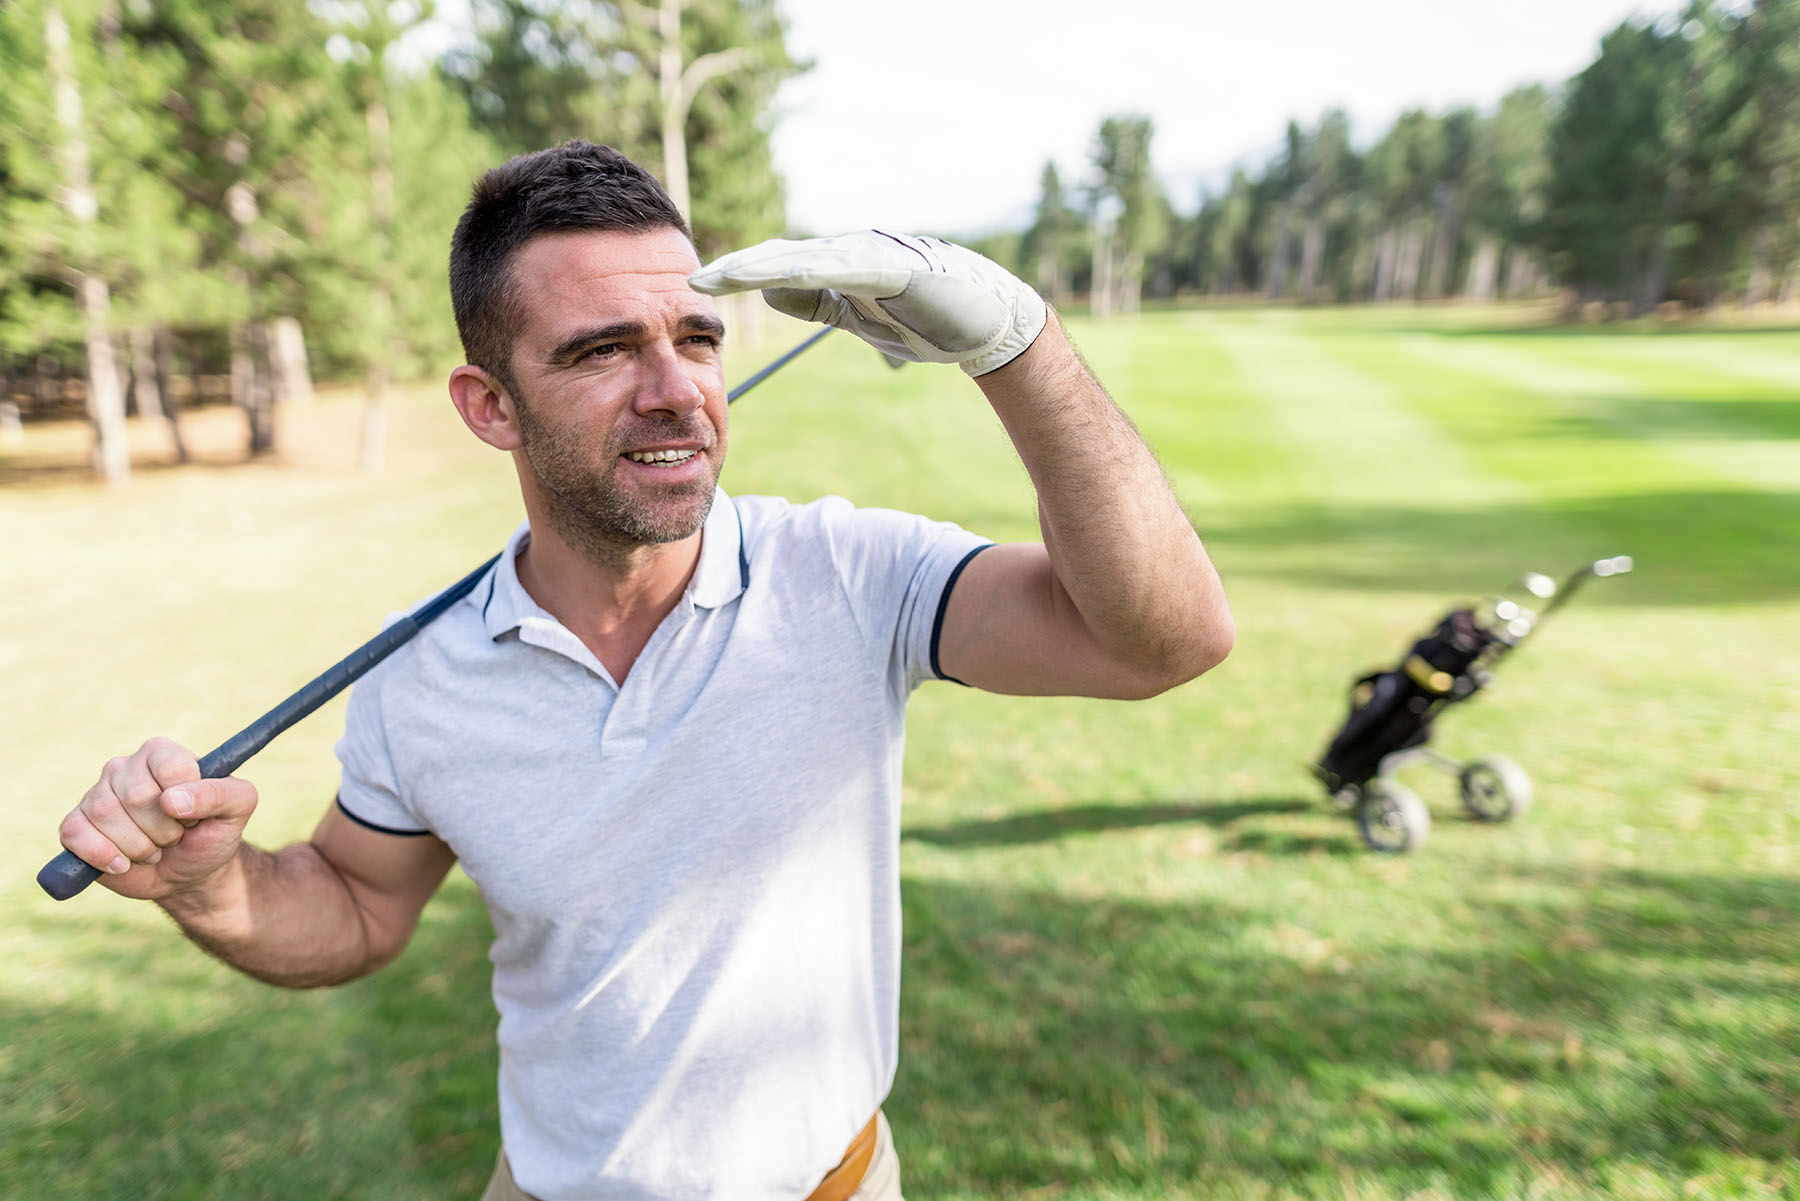 Man looks to the distance judging how far he hit a golf ball.